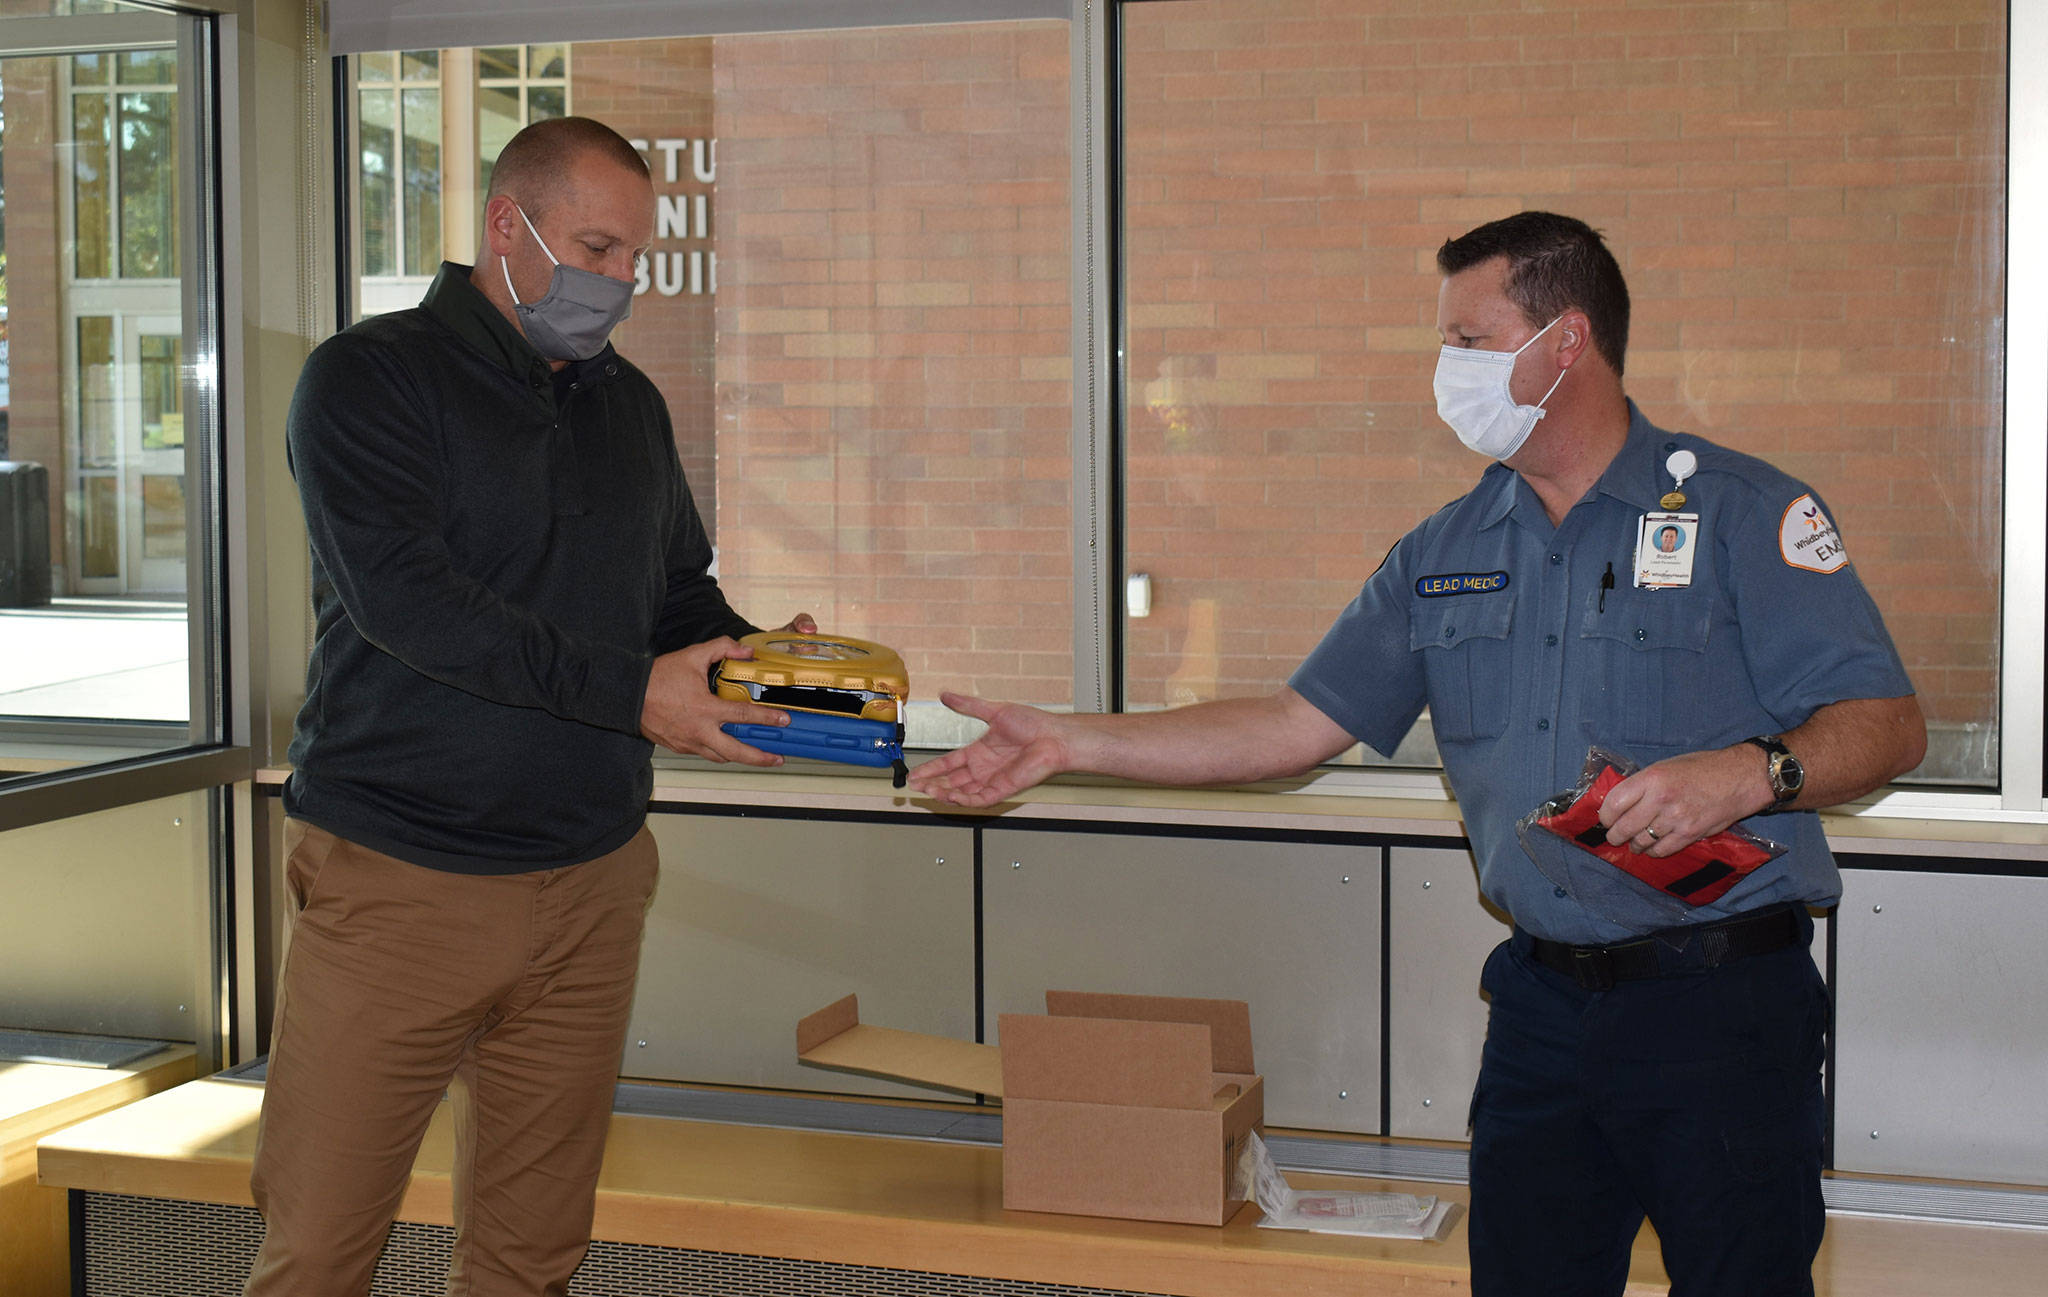 Oak Harbor High School Athletic Director Jerrod Fleury, left, receives a donated AED from Robert May, lead paramedic/public education coordinator for Whidbey Health EMS. (Photo by Tabetha Darrow)